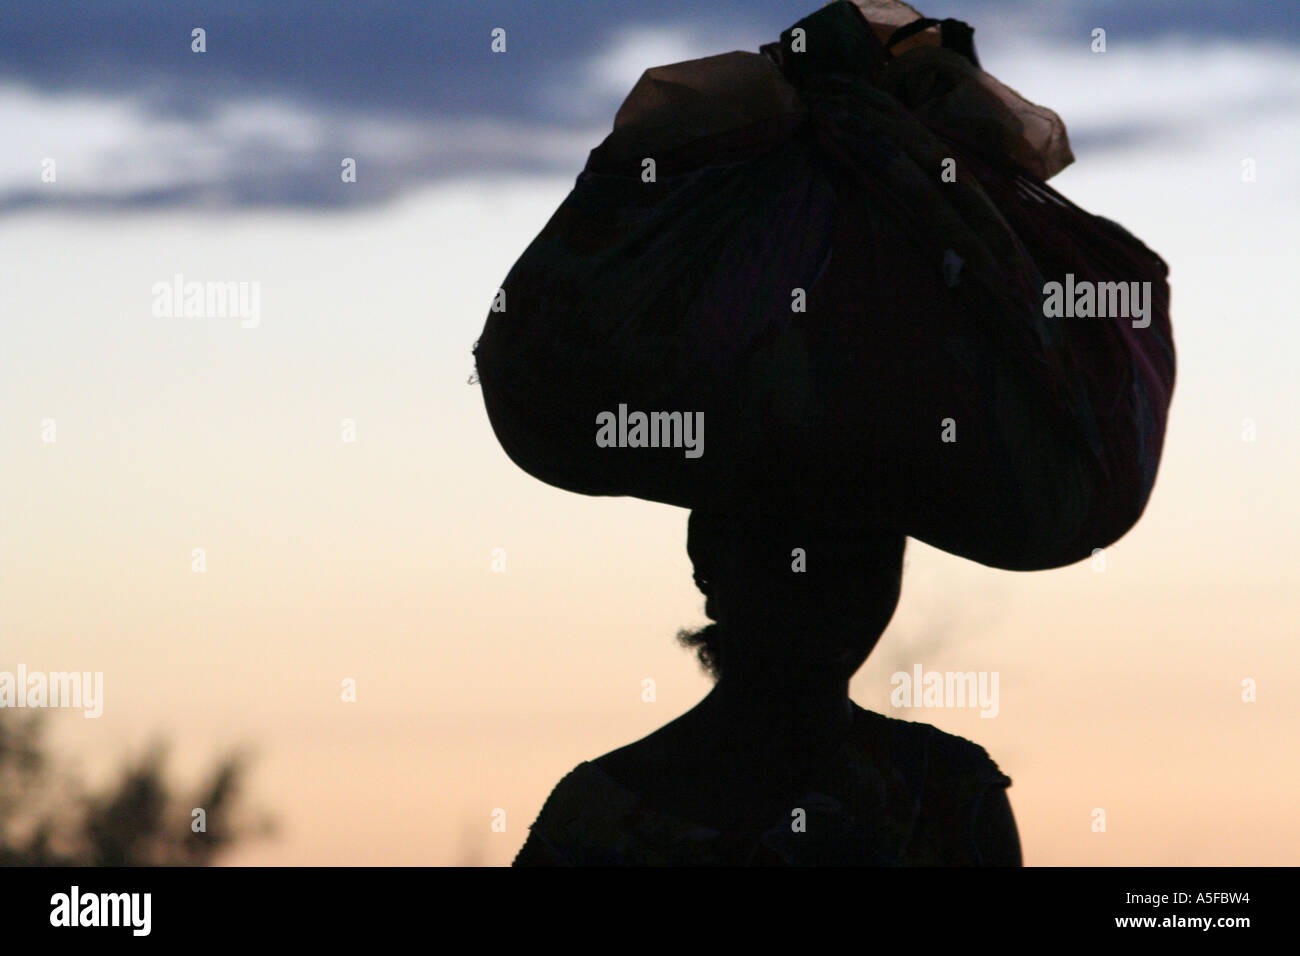 Silhouette of a woman carrying a large bag on her head in Ifaty, north of Toliara, ( Tulear ), Madagascar Stock Photo